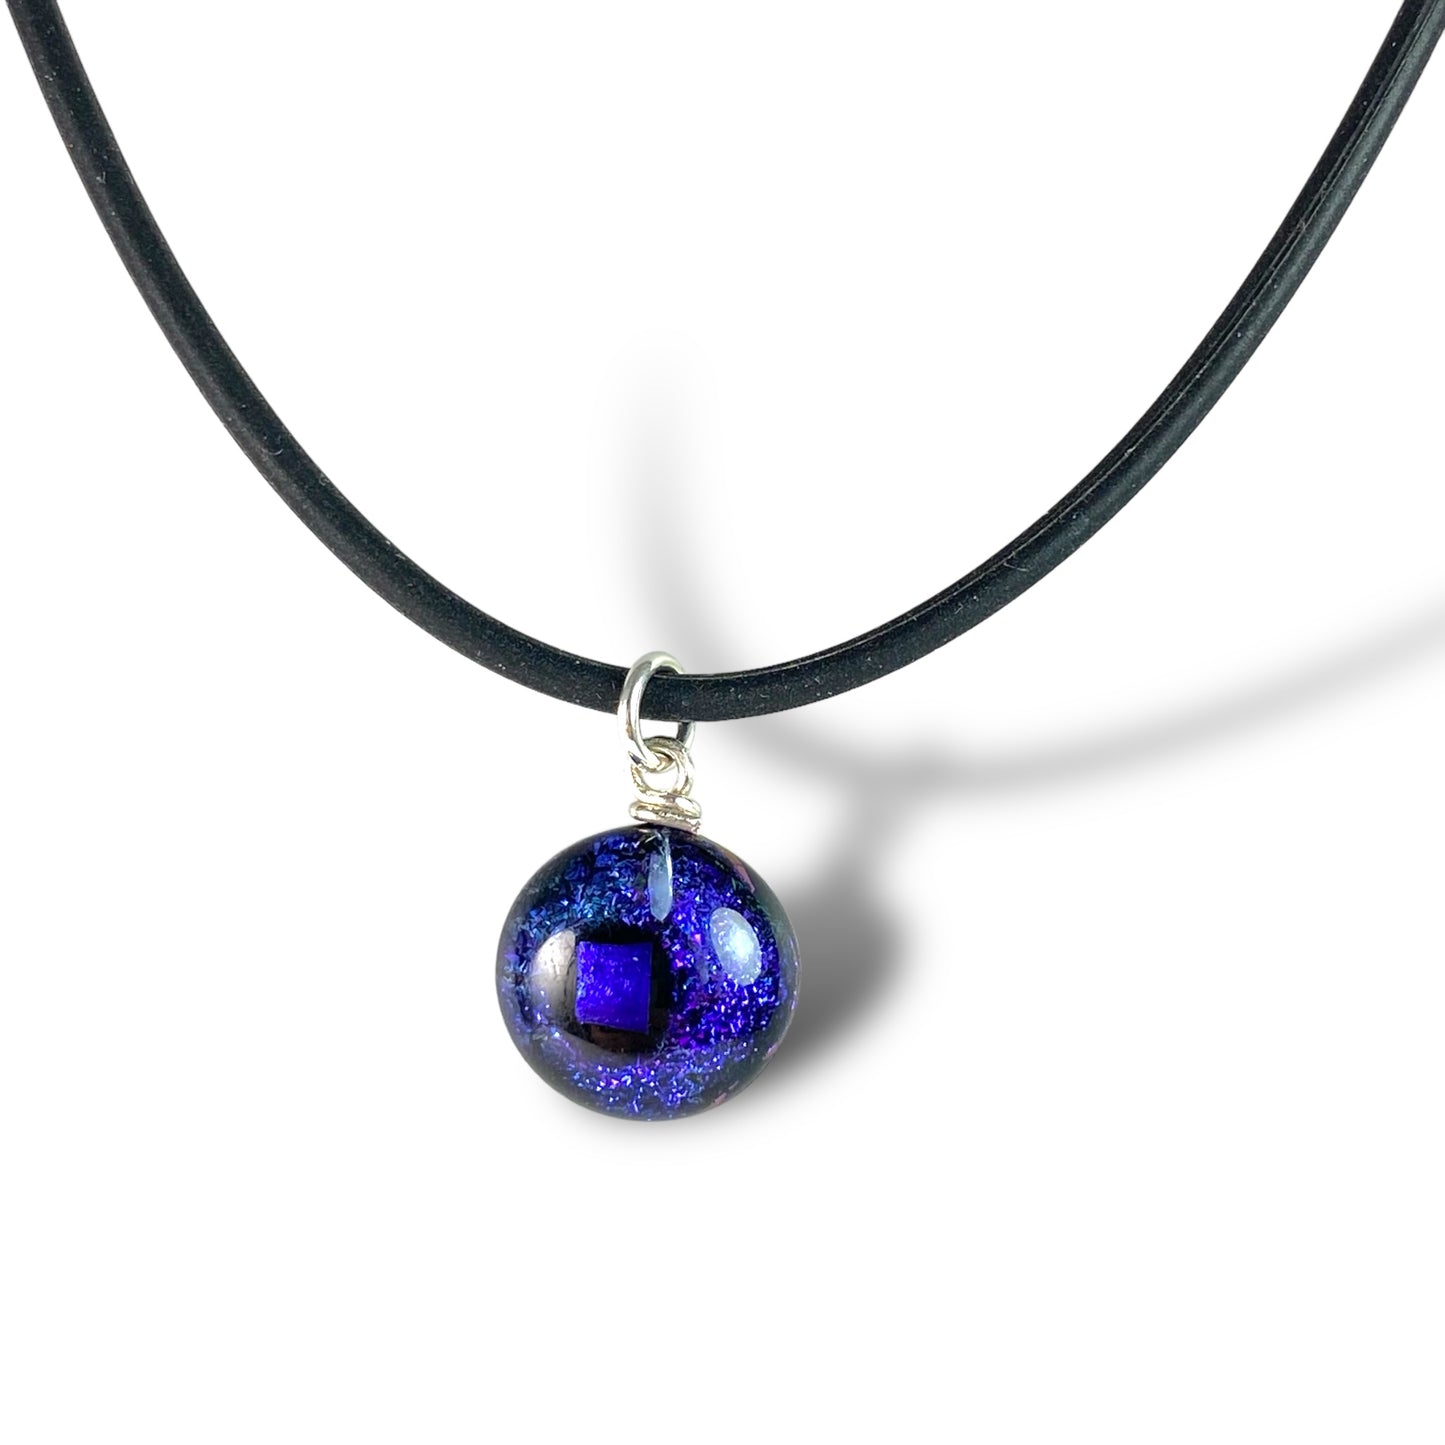 Space Ball Necklace in Grape